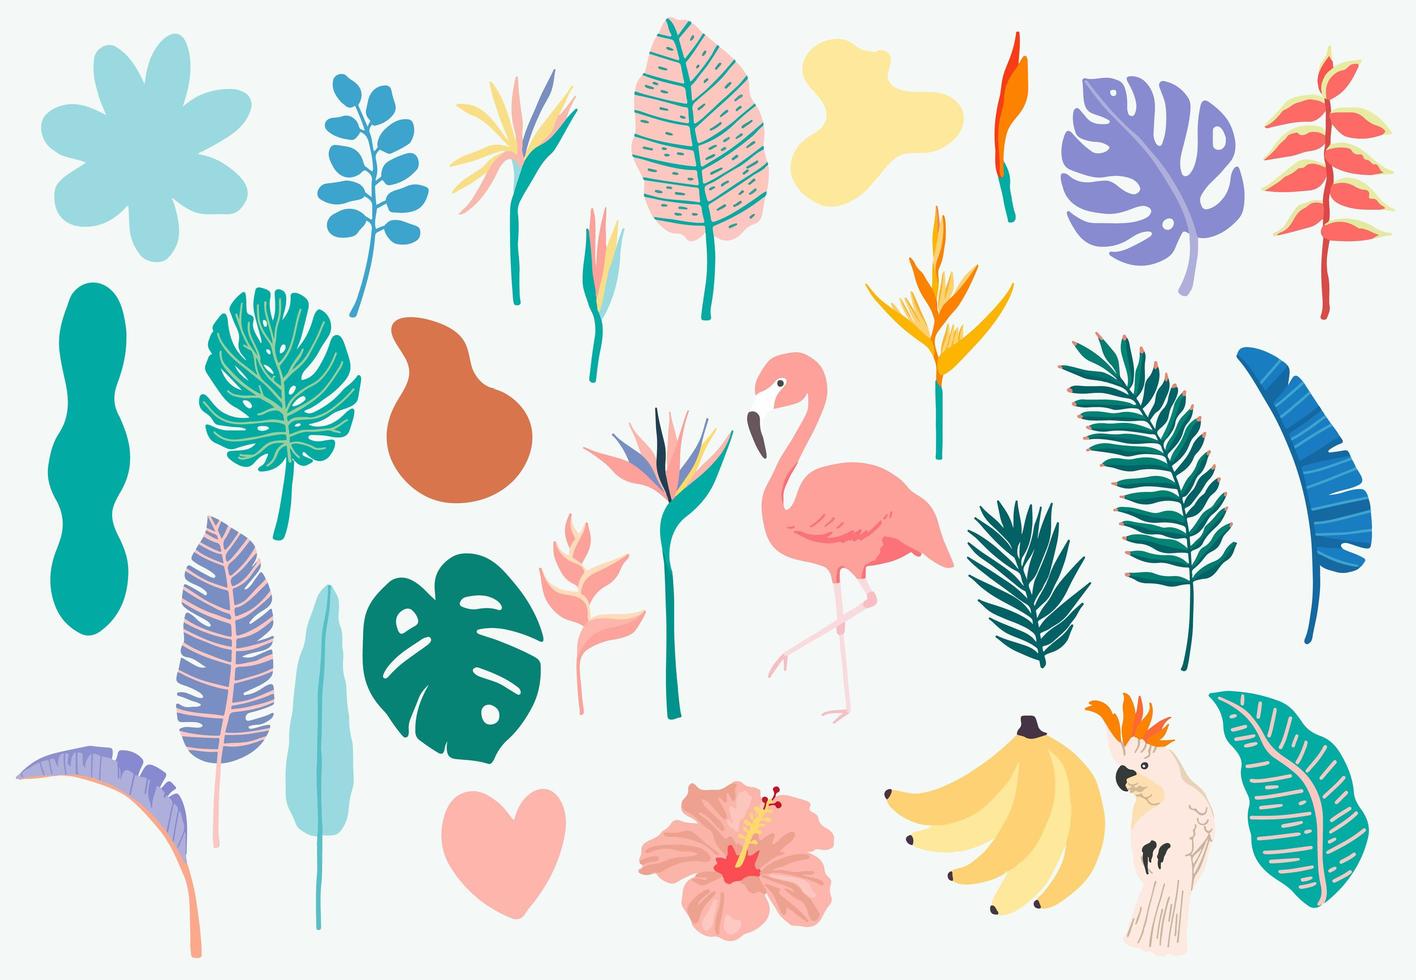 Summer objects including flamingo, banana, parrot and flower vector